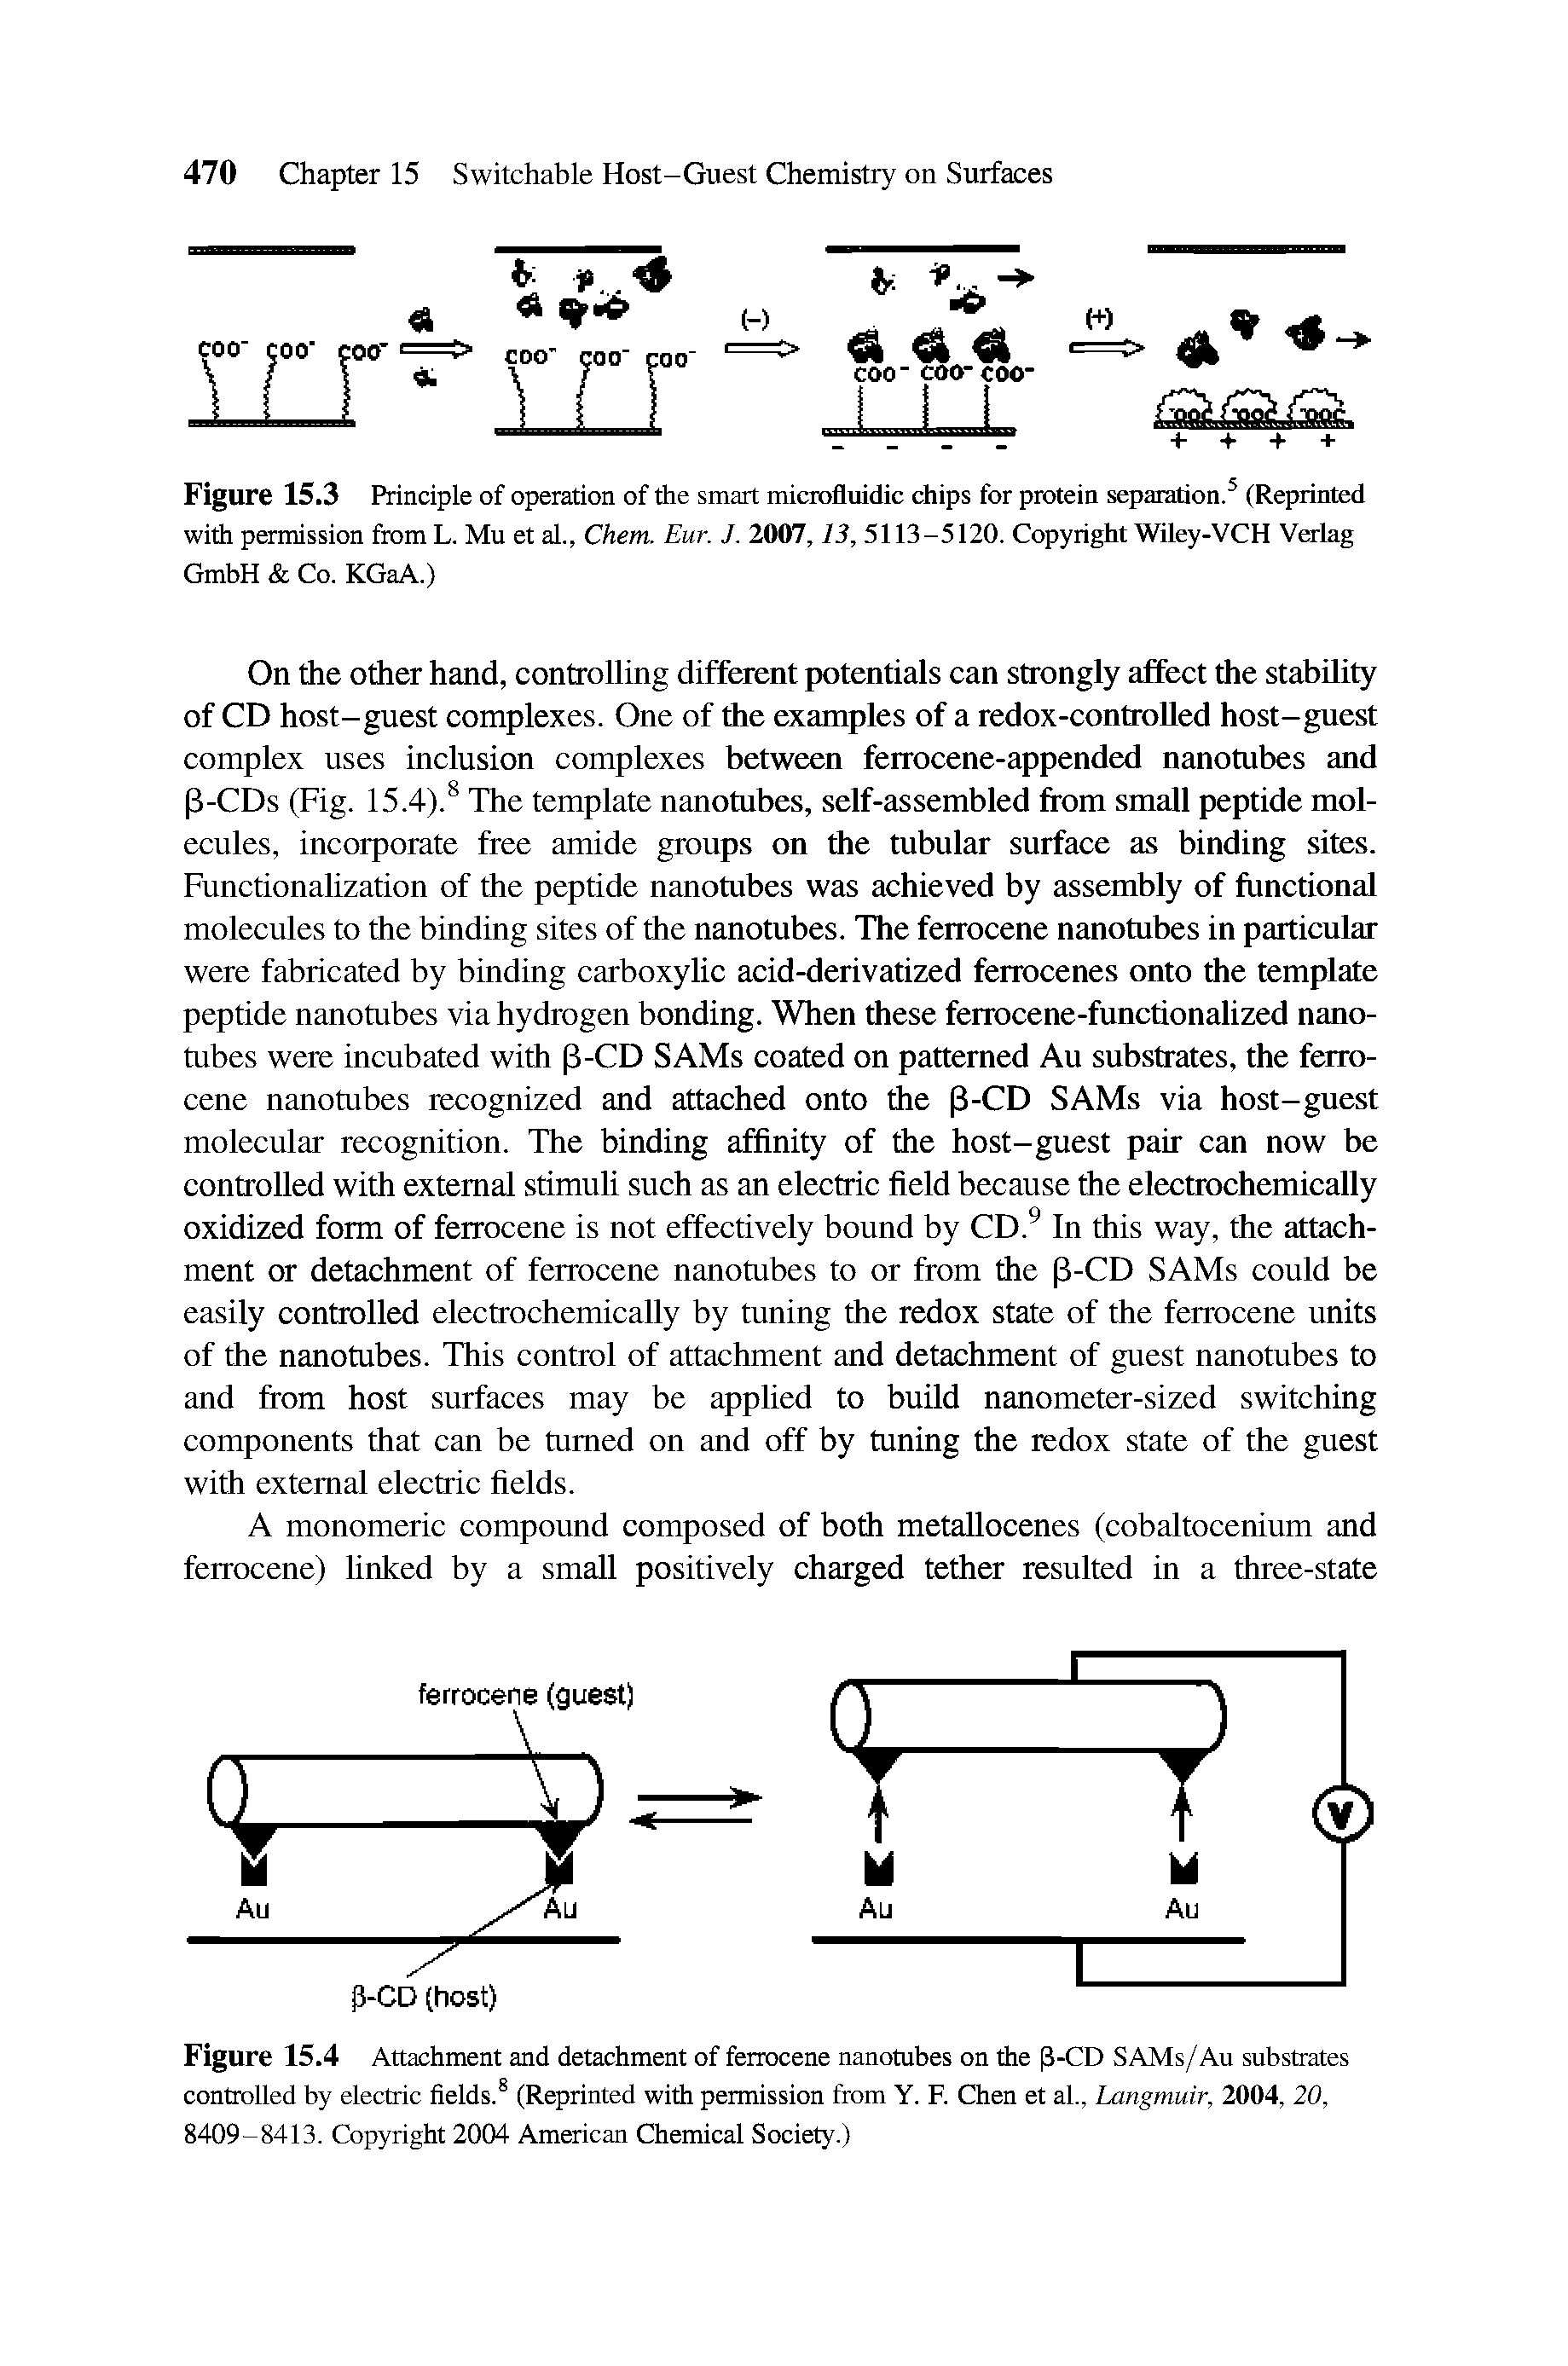 Figure 15.4 Attachment and detachment of ferrocene nanotubes on the (3-CD SAMs/Au substrates controlled by electric fields.8 (Reprinted with permission from Y. F. Chen et al., Langmuir, 2004, 20, 8409-8413. Copyright 2004 American Chemical Society.)...